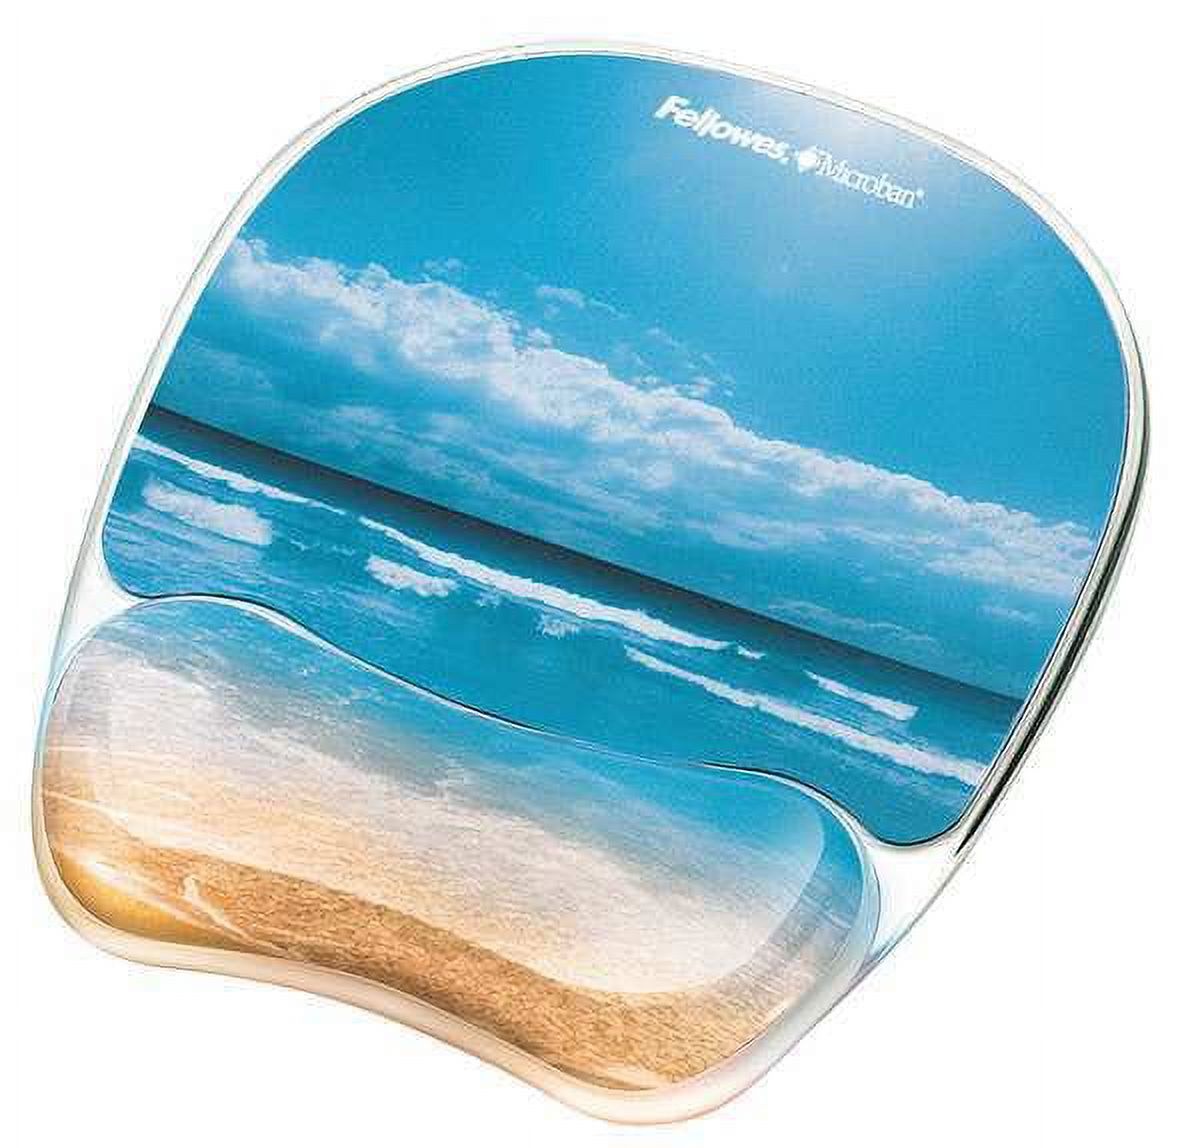 1PACK Fellowes 9179301 Mousepad w/Wrist Support, Sandy Beach - image 1 of 1